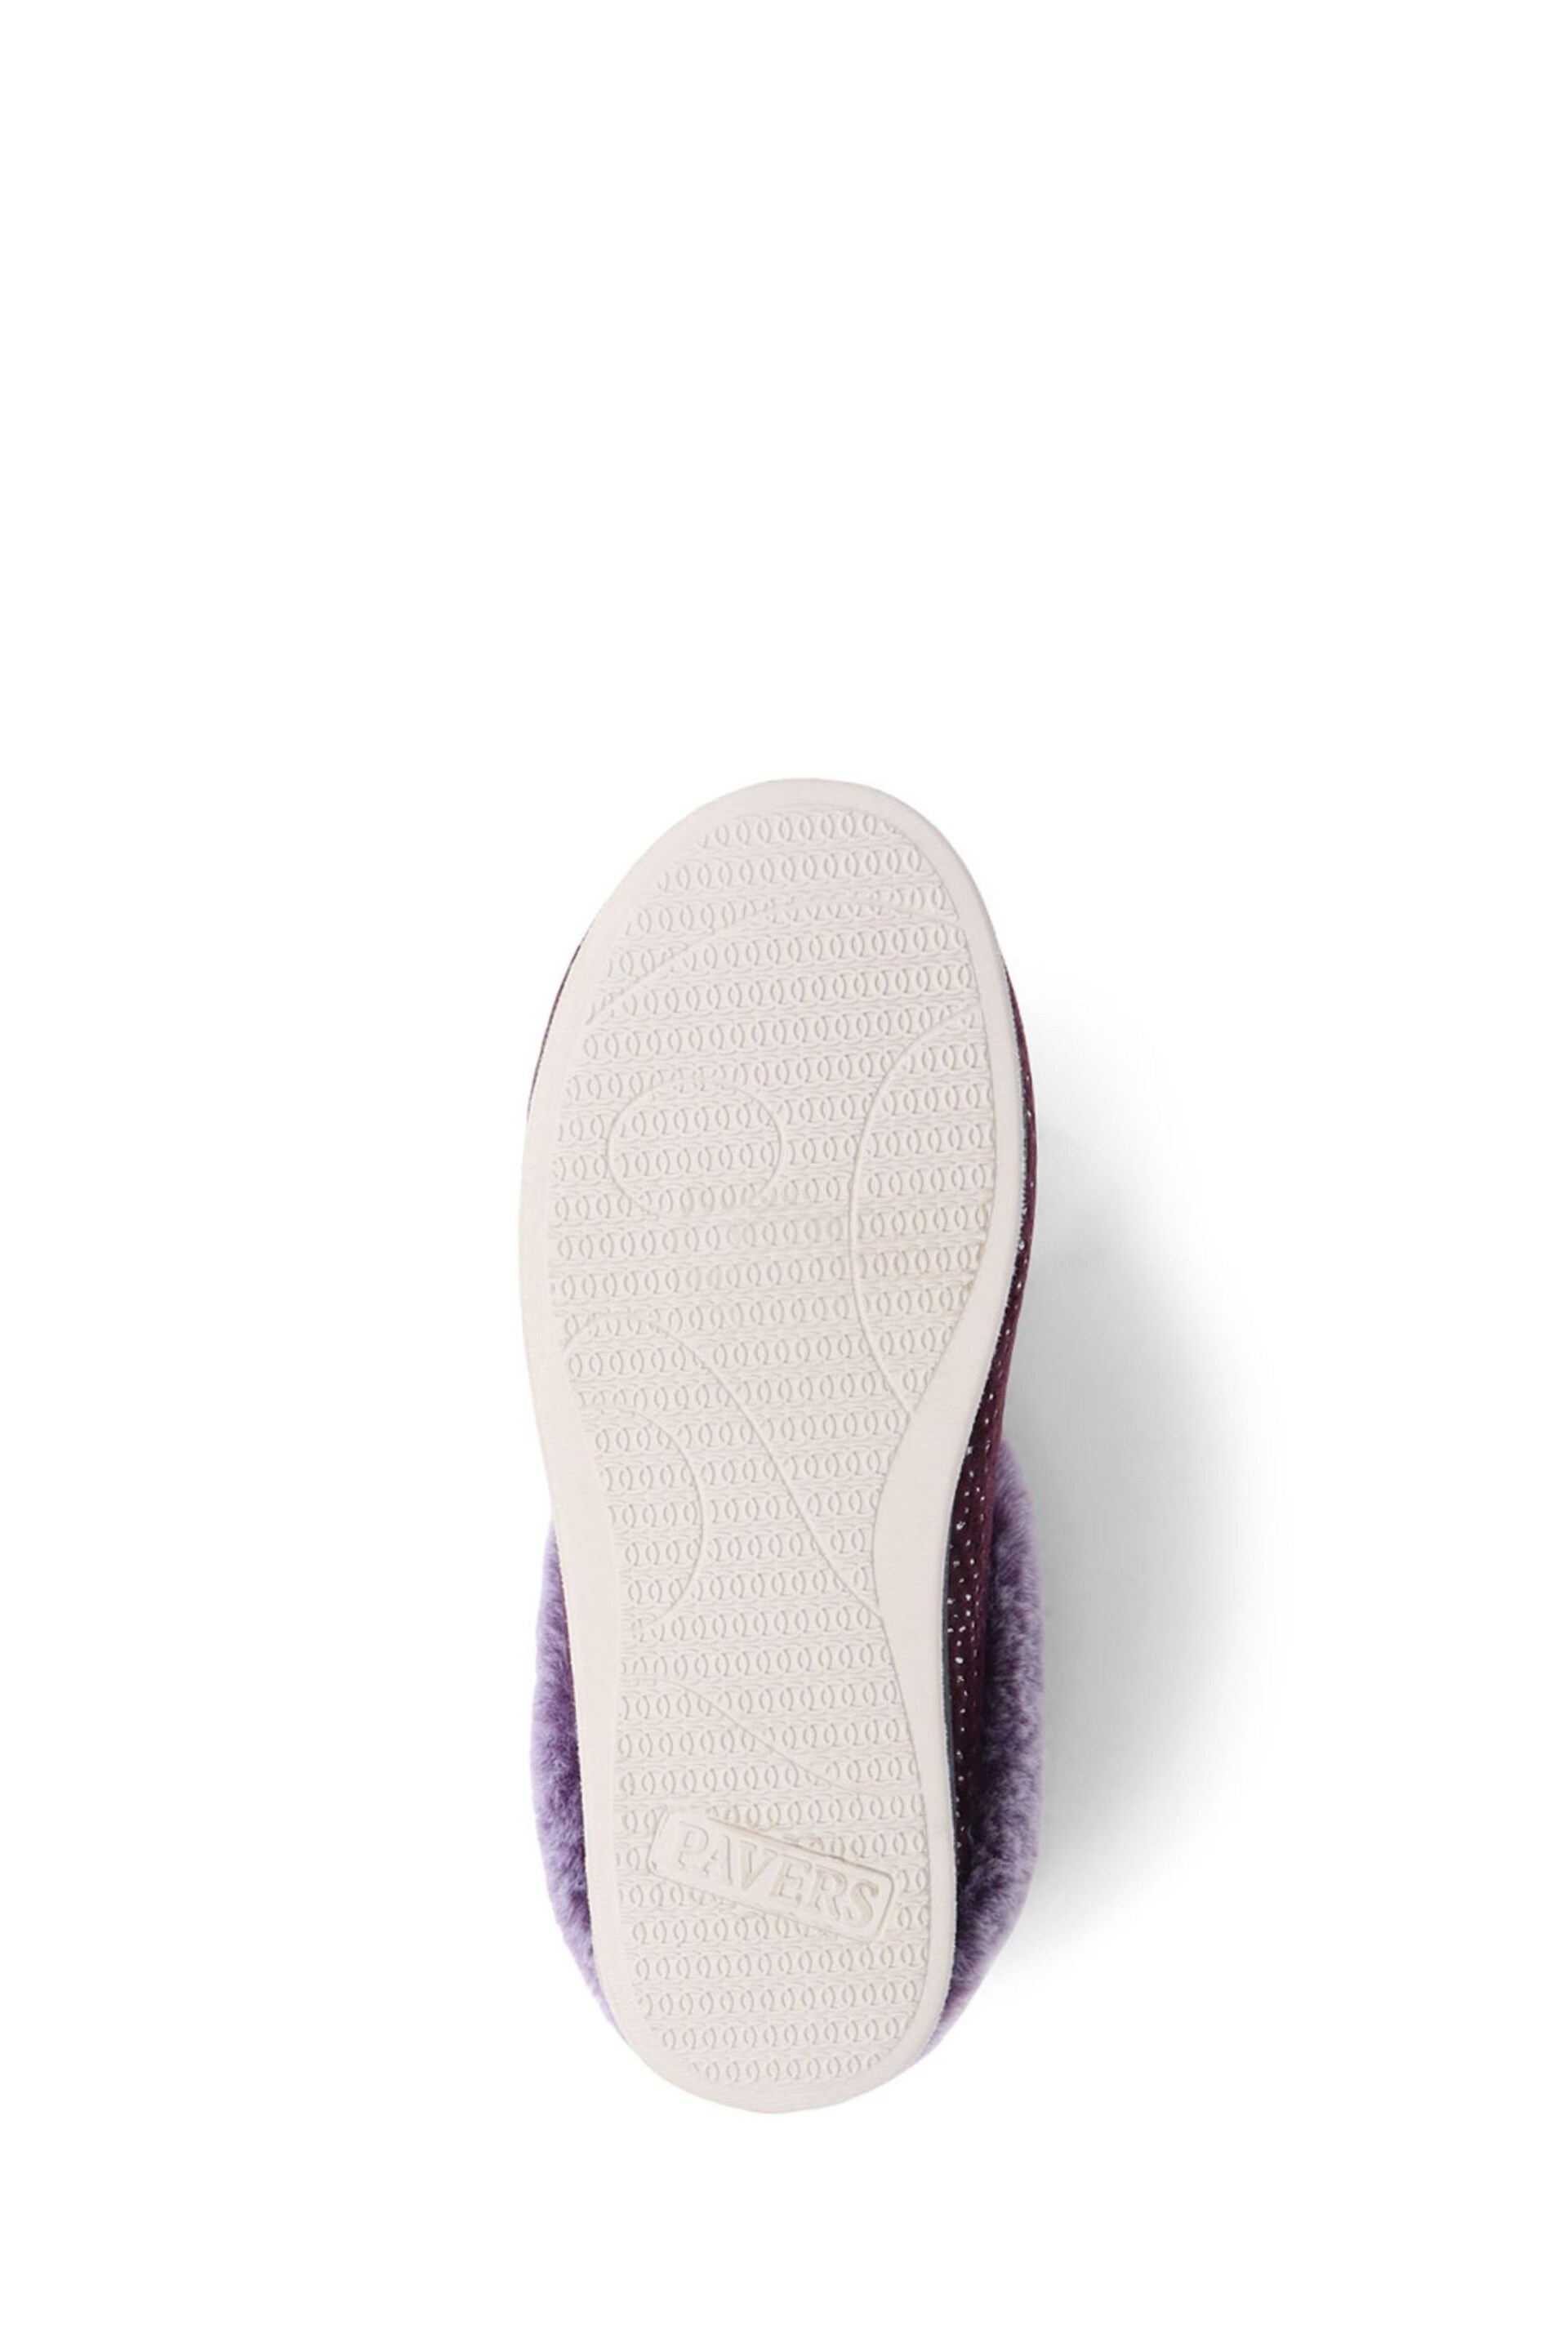 Pavers Purple Patterned Full Slippers - Image 5 of 5